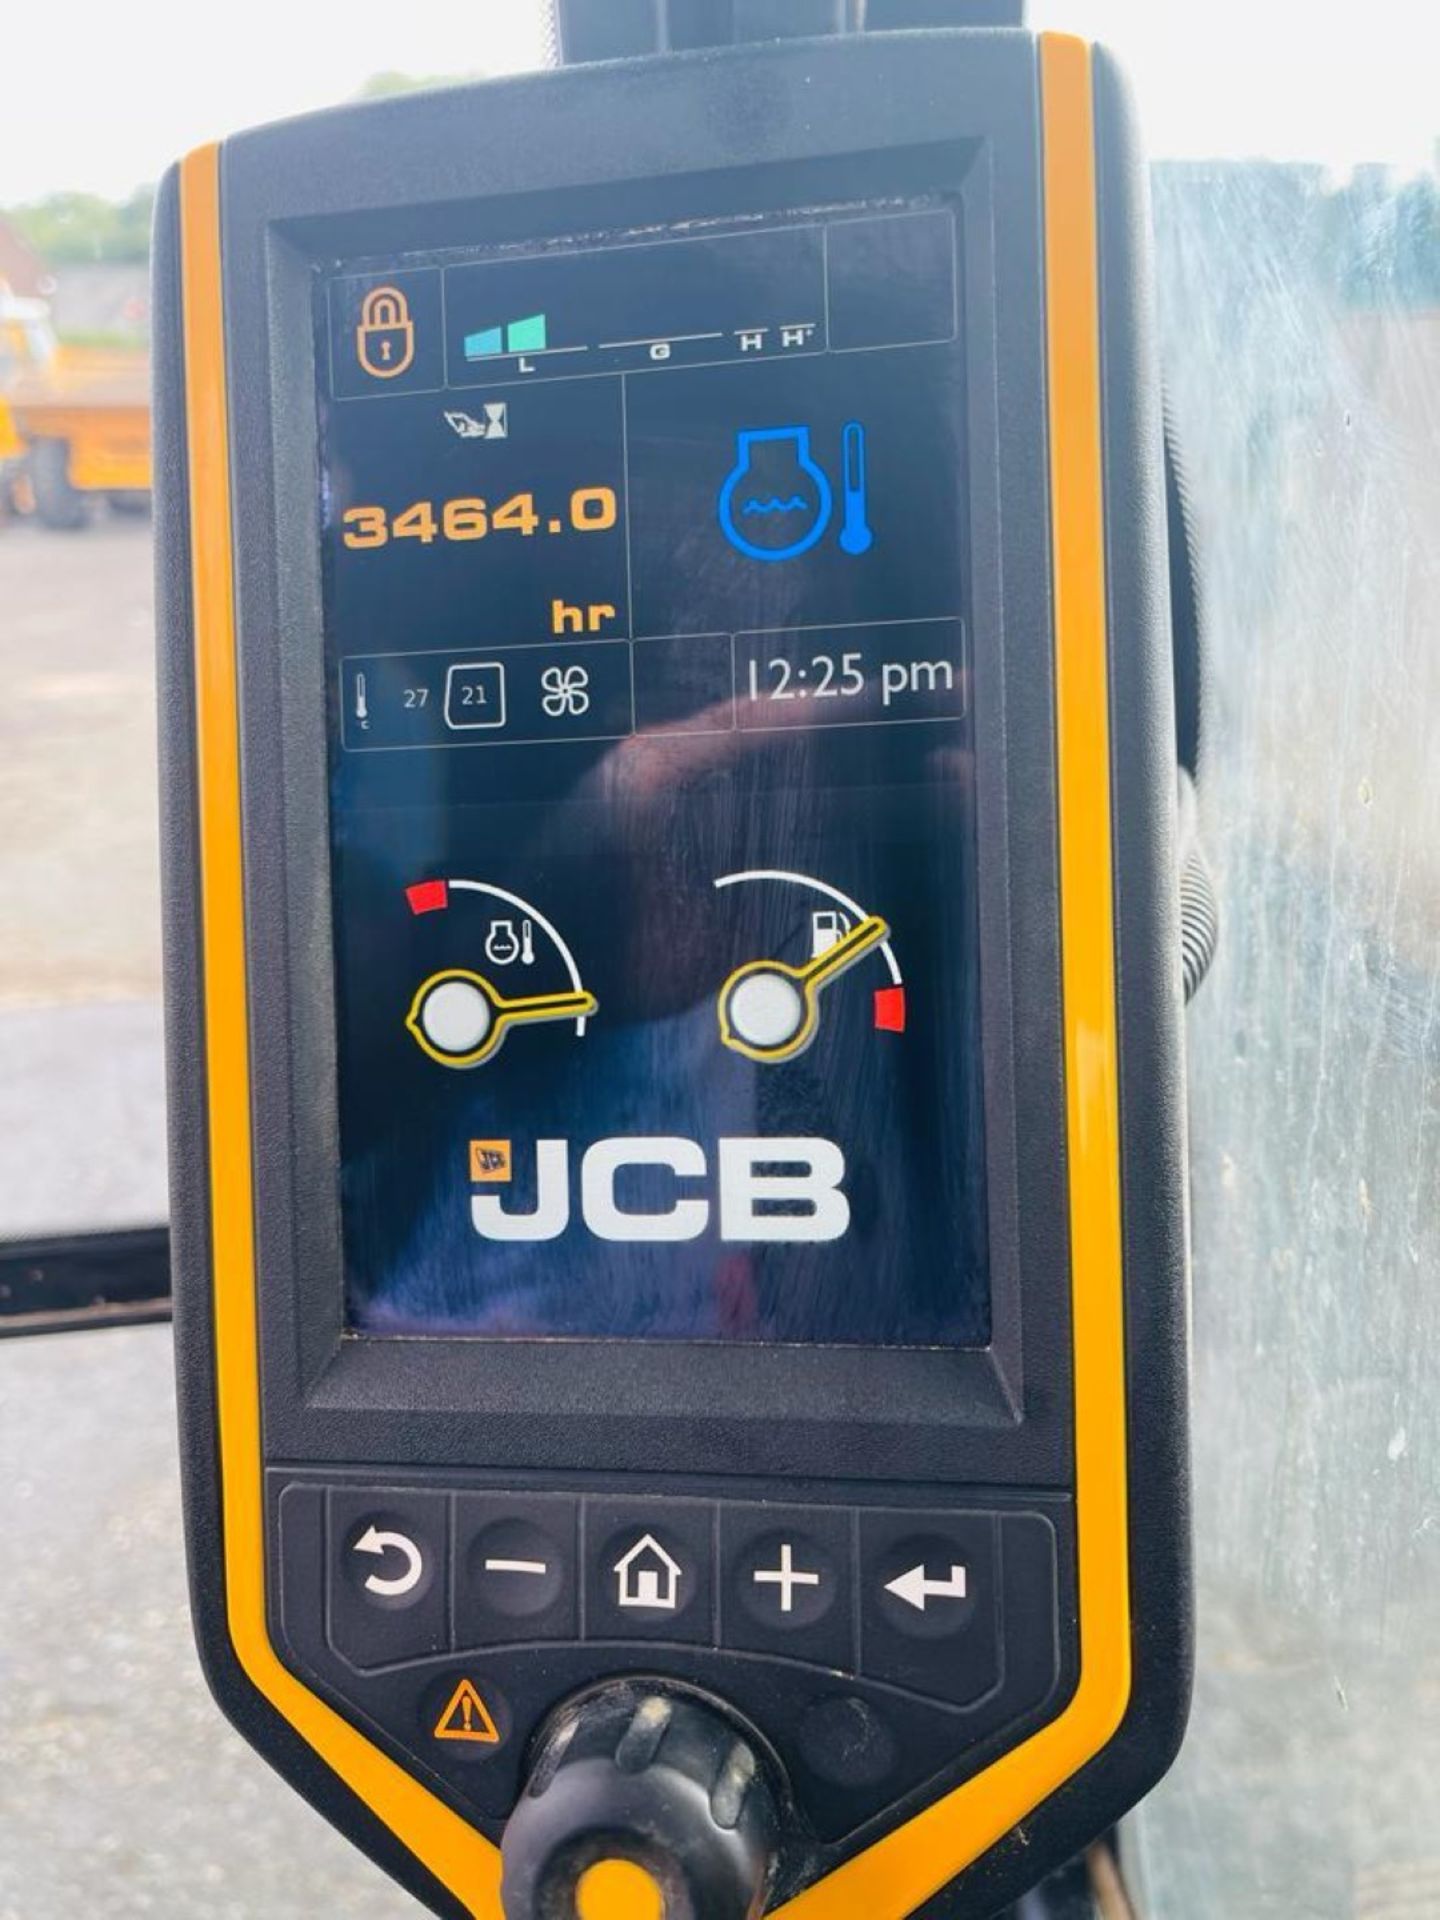 JCB JS131 LC PLUS 2018 3464 HOURS CODED START AIR CON - Image 7 of 15